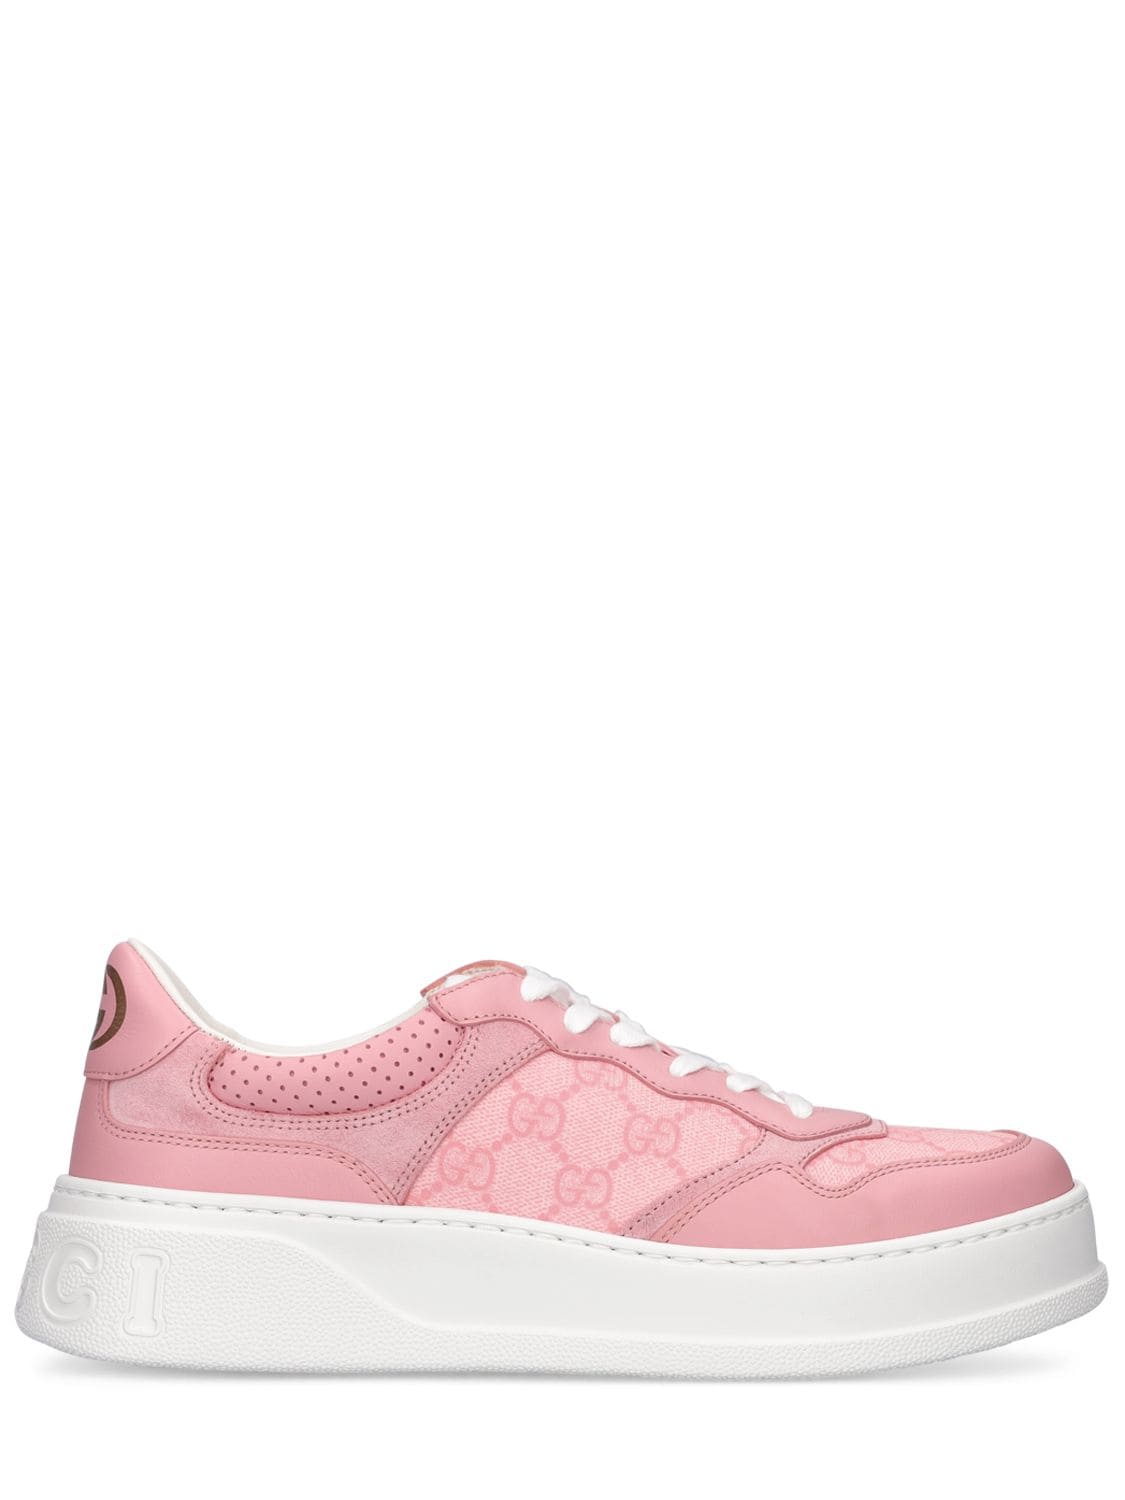 Forbipasserende Urskive Udtale Gucci 55mm Chunky B Leather Sneakers In Wild Rose | ModeSens